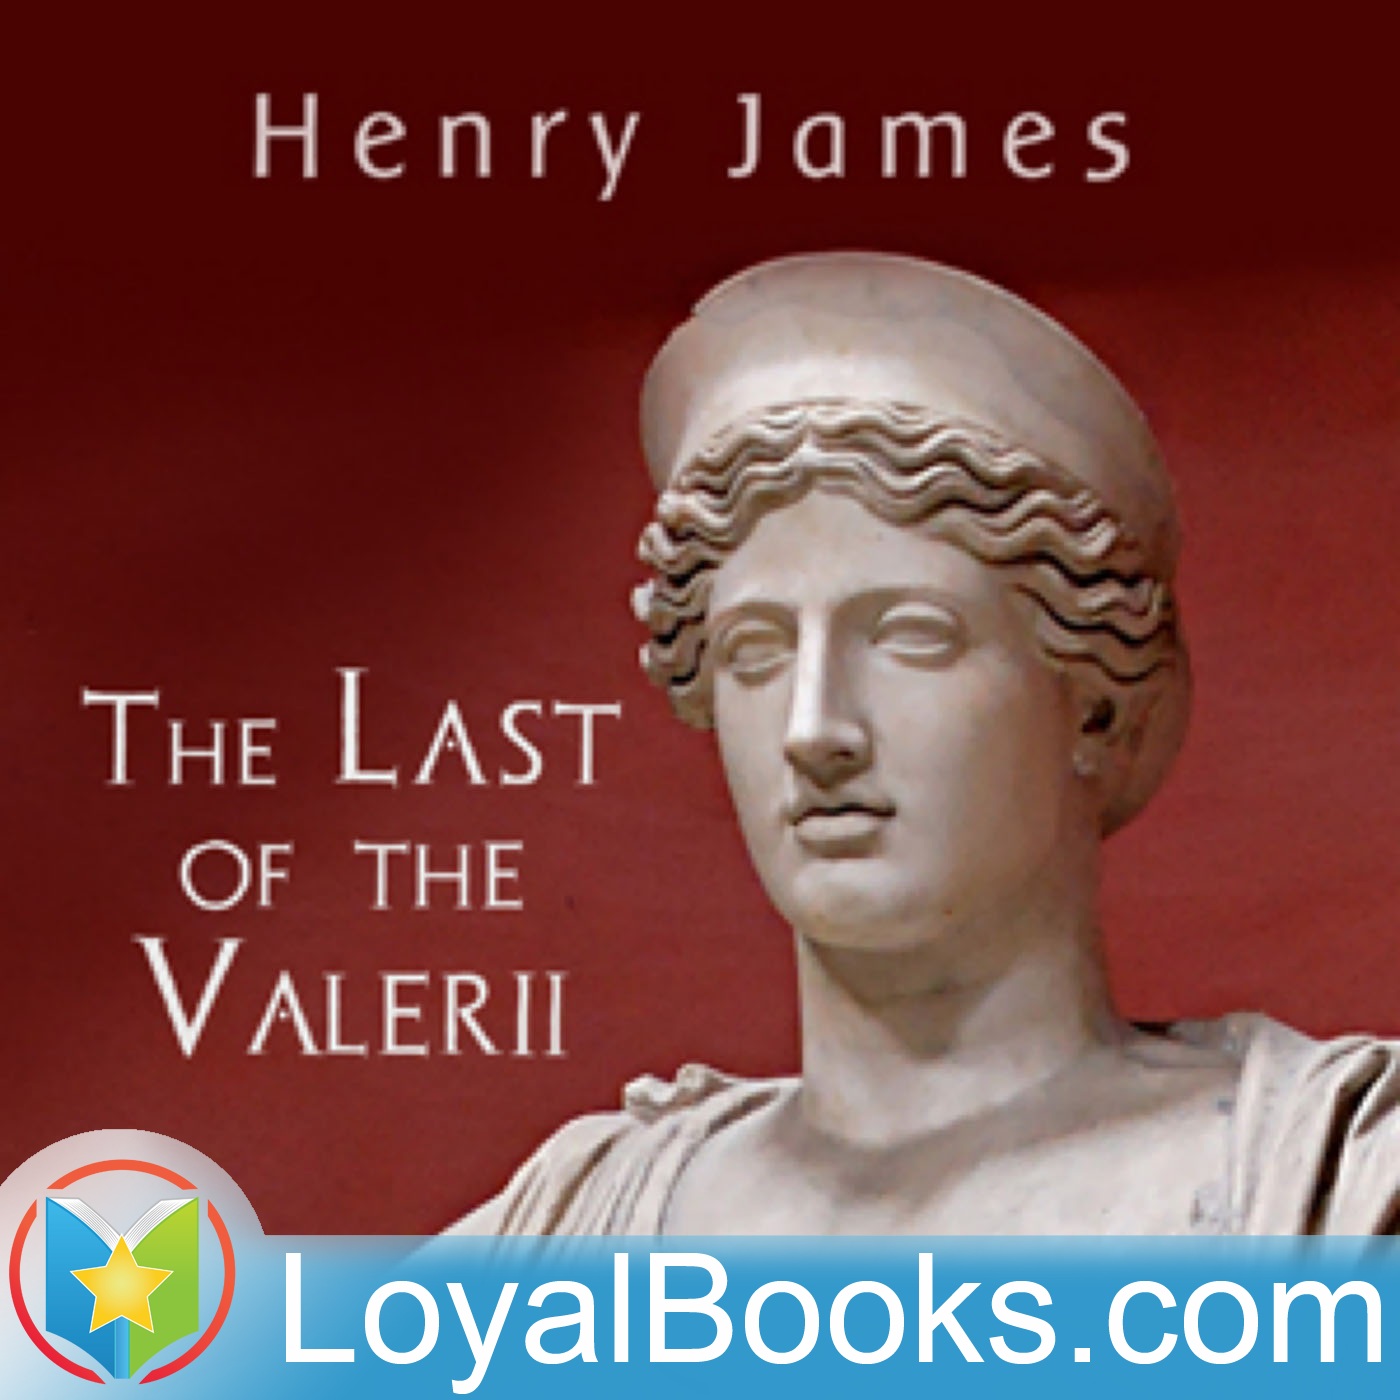 The Last of the Valerii by Henry James